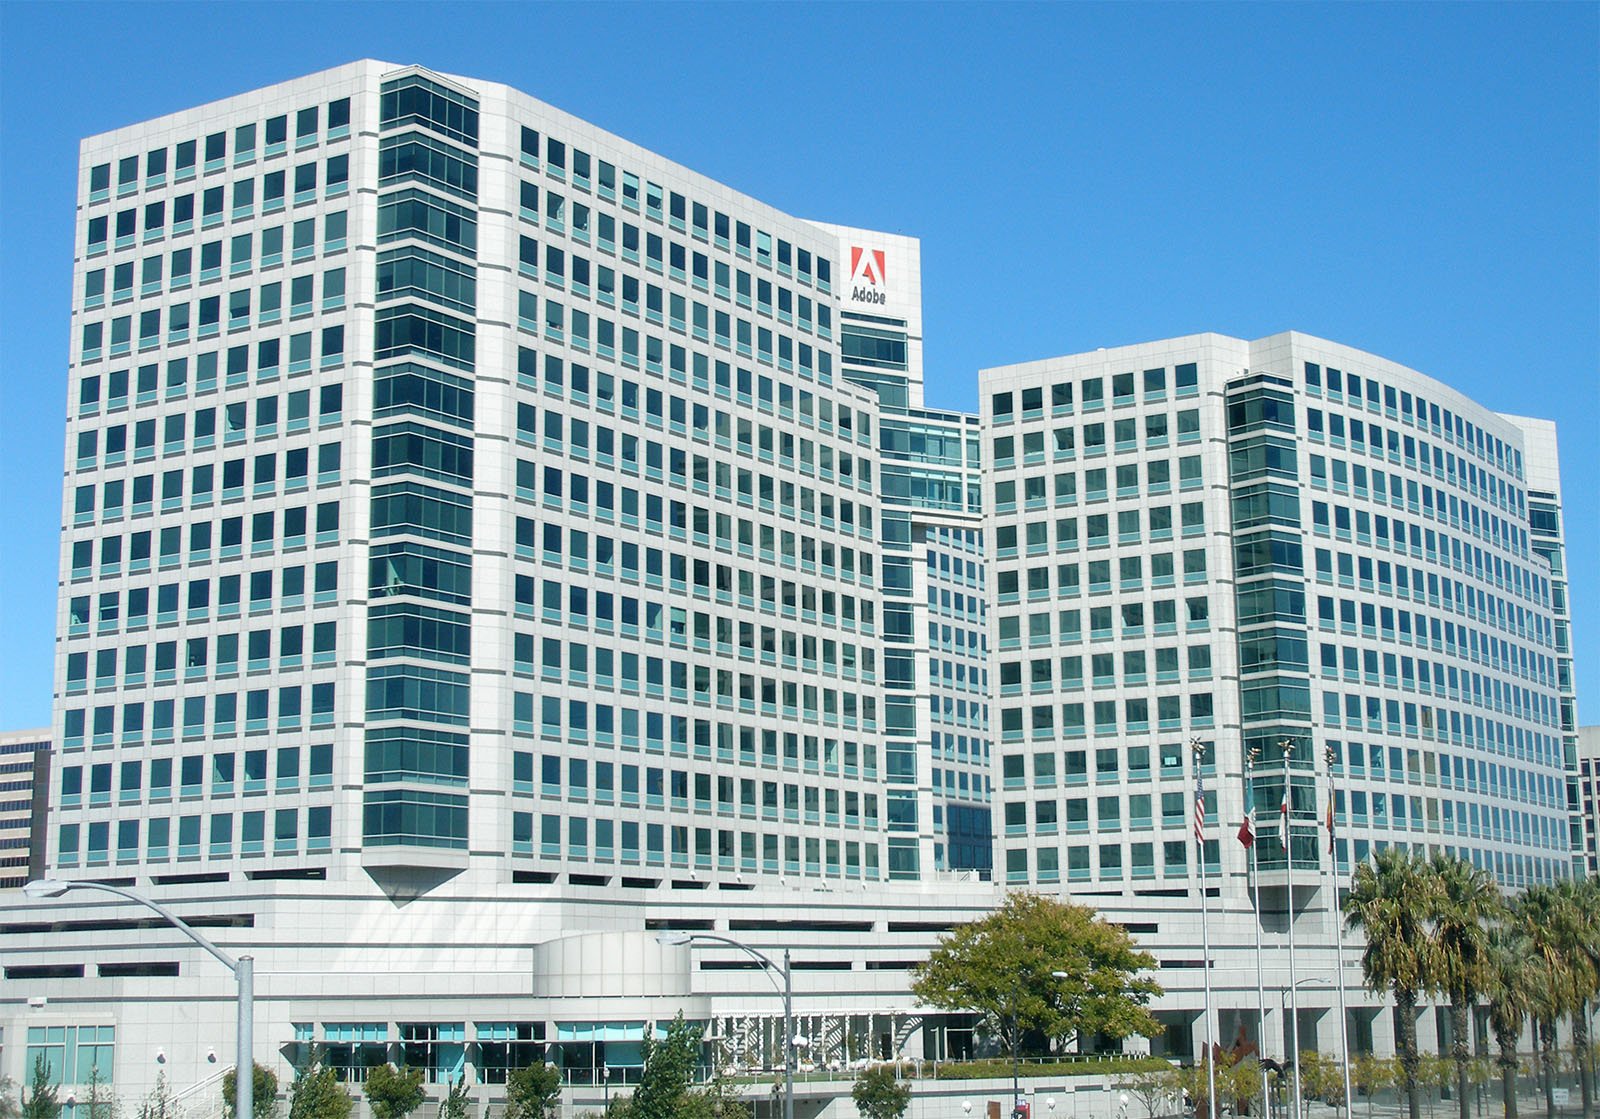 A view of the Adobe Systems headquarters, featuring two modern high-rise office buildings with numerous windows. The buildings are white with grey accents and are connected by a glass bridge. Flags are displayed near the entrance, and the sky is clear and blue.